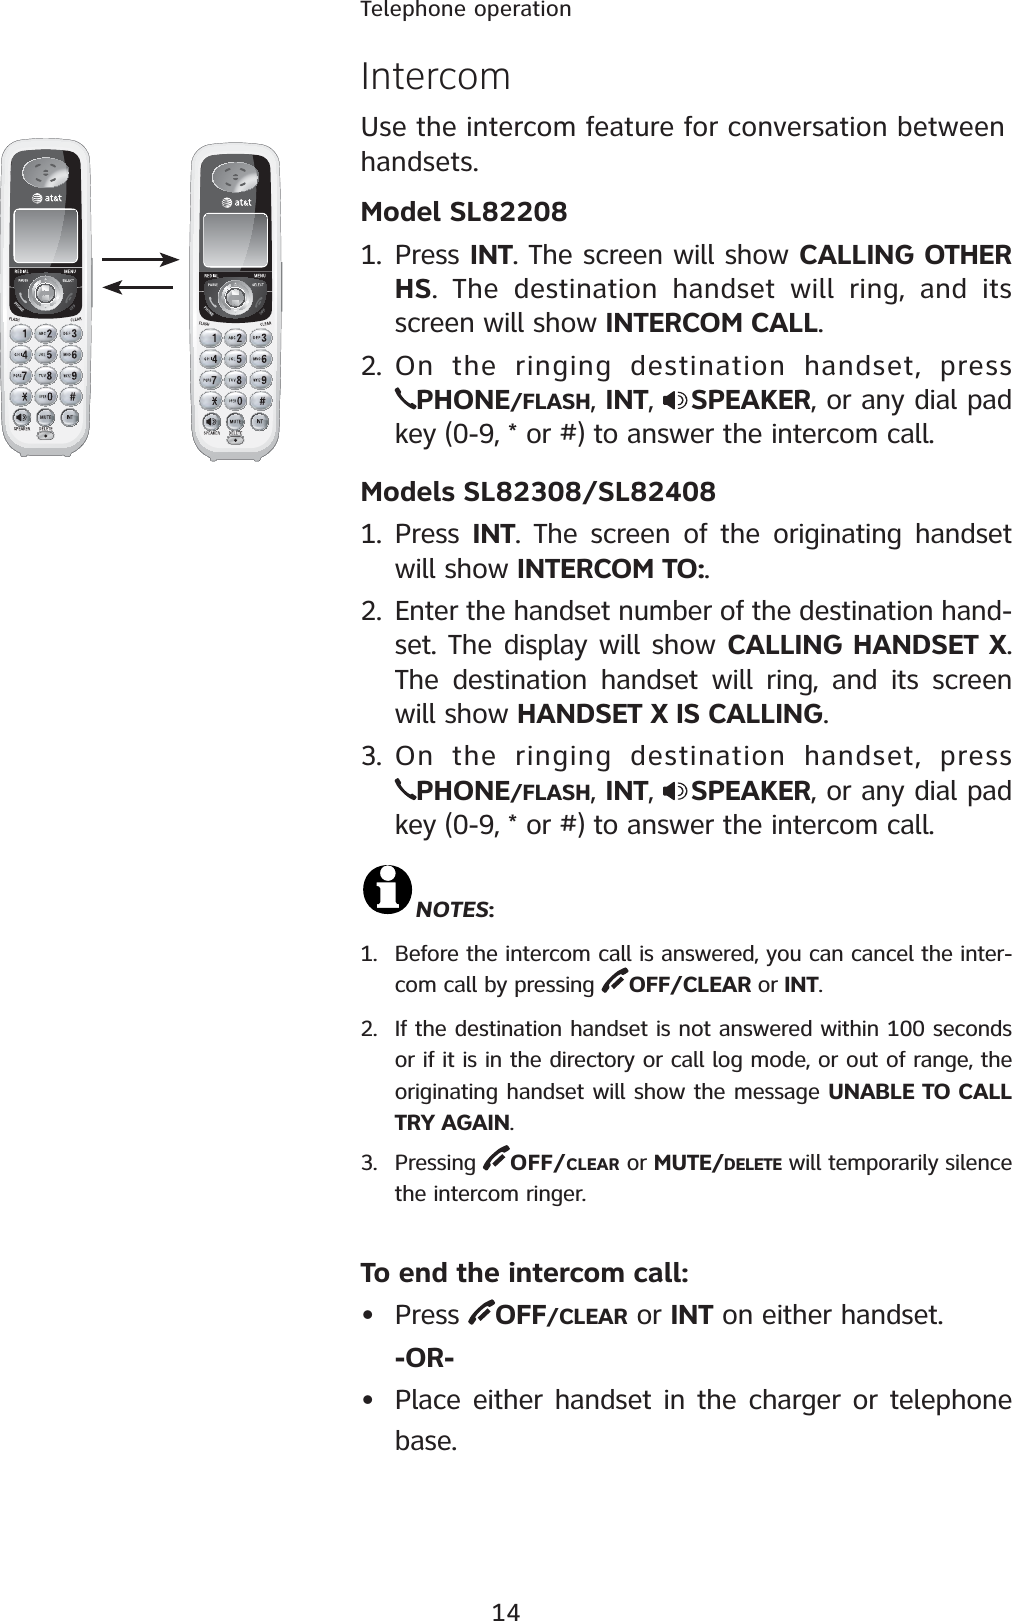 14Telephone operationIntercomUse the intercom feature for conversation between handsets.Model SL822081. Press INT. The screen will show CALLING OTHER HS. The destination handset will ring, and its screen will show INTERCOM CALL.2. On the ringing destination handset, press PHONE/FLASH, INT,  SPEAKER, or any dial pad key (0-9, * or #) to answer the intercom call.Models SL82308/SL824081. Press  INT. The screen of the originating handset will show INTERCOM TO:.2. Enter the handset number of the destination hand-set. The display will show CALLING HANDSET X.  The destination handset will ring, and its screen will show HANDSET X IS CALLING.3. On the ringing destination handset, press PHONE/FLASH, INT,  SPEAKER, or any dial pad key (0-9, * or #) to answer the intercom call.NOTES:1. Before the intercom call is answered, you can cancel the inter-com call by pressing  OFF/CLEAR or INT.2. If the destination handset is not answered within 100 seconds or if it is in the directory or call log mode, or out of range, the originating handset will show the message UNABLE TO CALL TRY AGAIN.3. Pressing  OFF/CLEAR or MUTE/DELETE will temporarily silence the intercom ringer.To end the intercom call:• Press  OFF/CLEAR or INT on either handset.-OR-• Place either handset in the charger or telephone base.